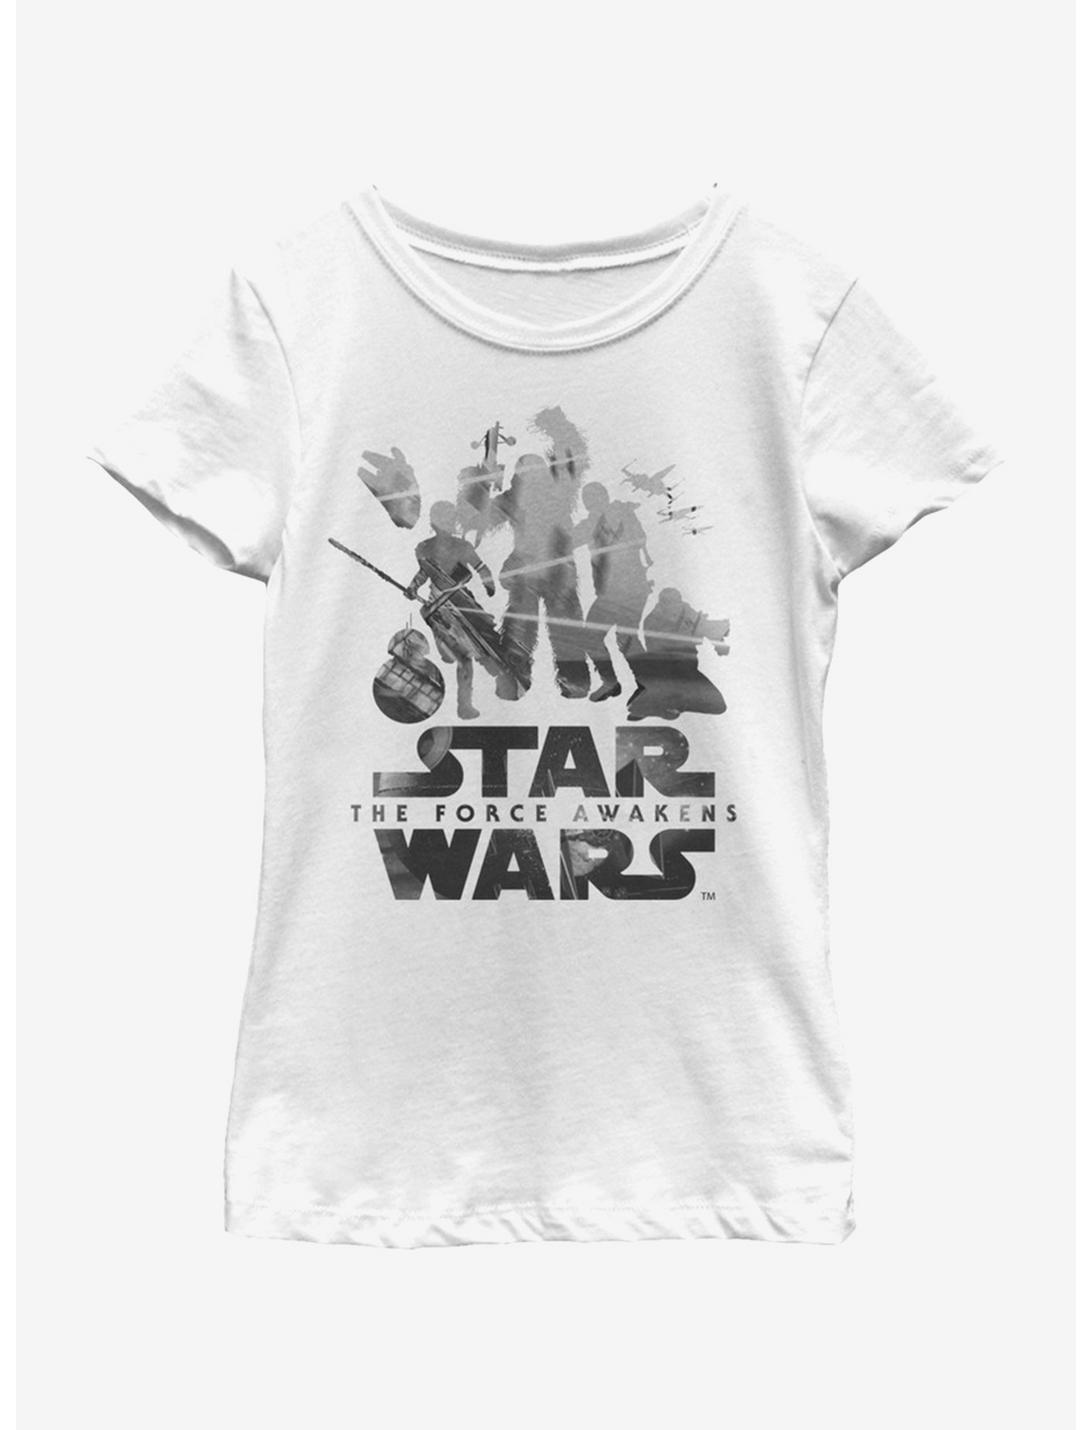 Star Wars The Force Awakens Sihouettes Youth Girls T-Shirt, WHITE, hi-res